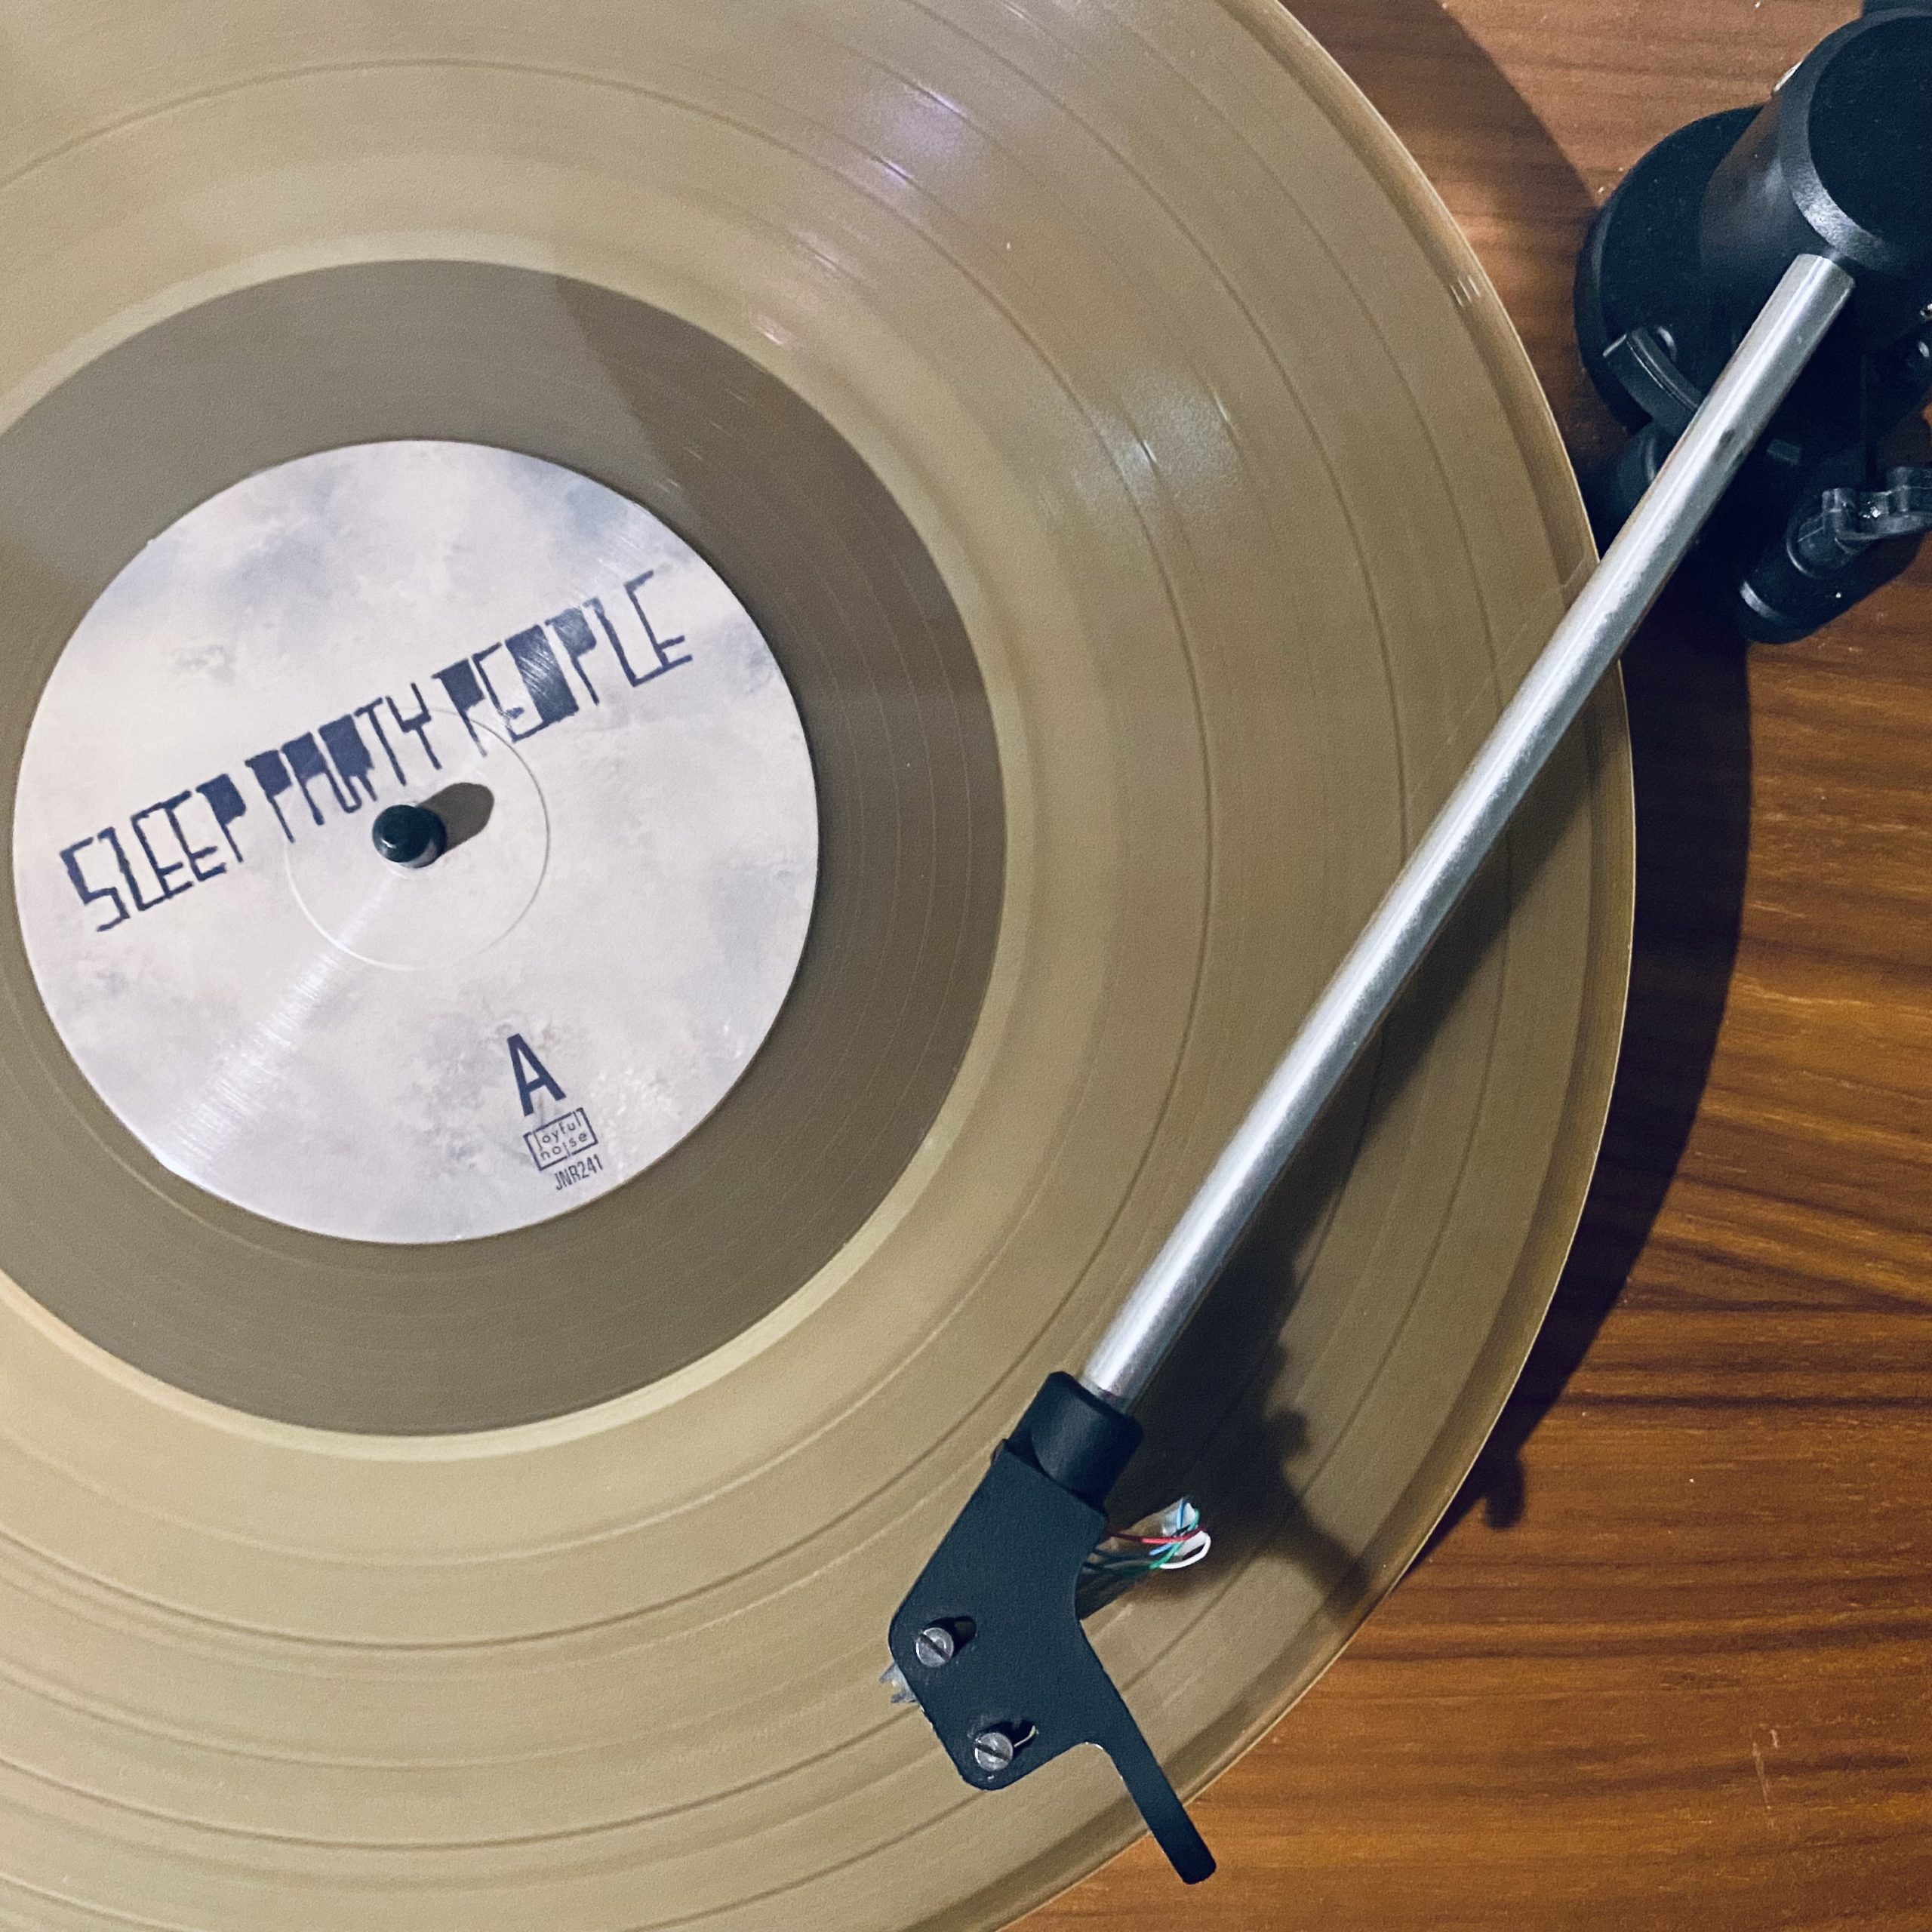 Sleep Party People 10th Anniversary Reissue on Pale Gold Vinyl